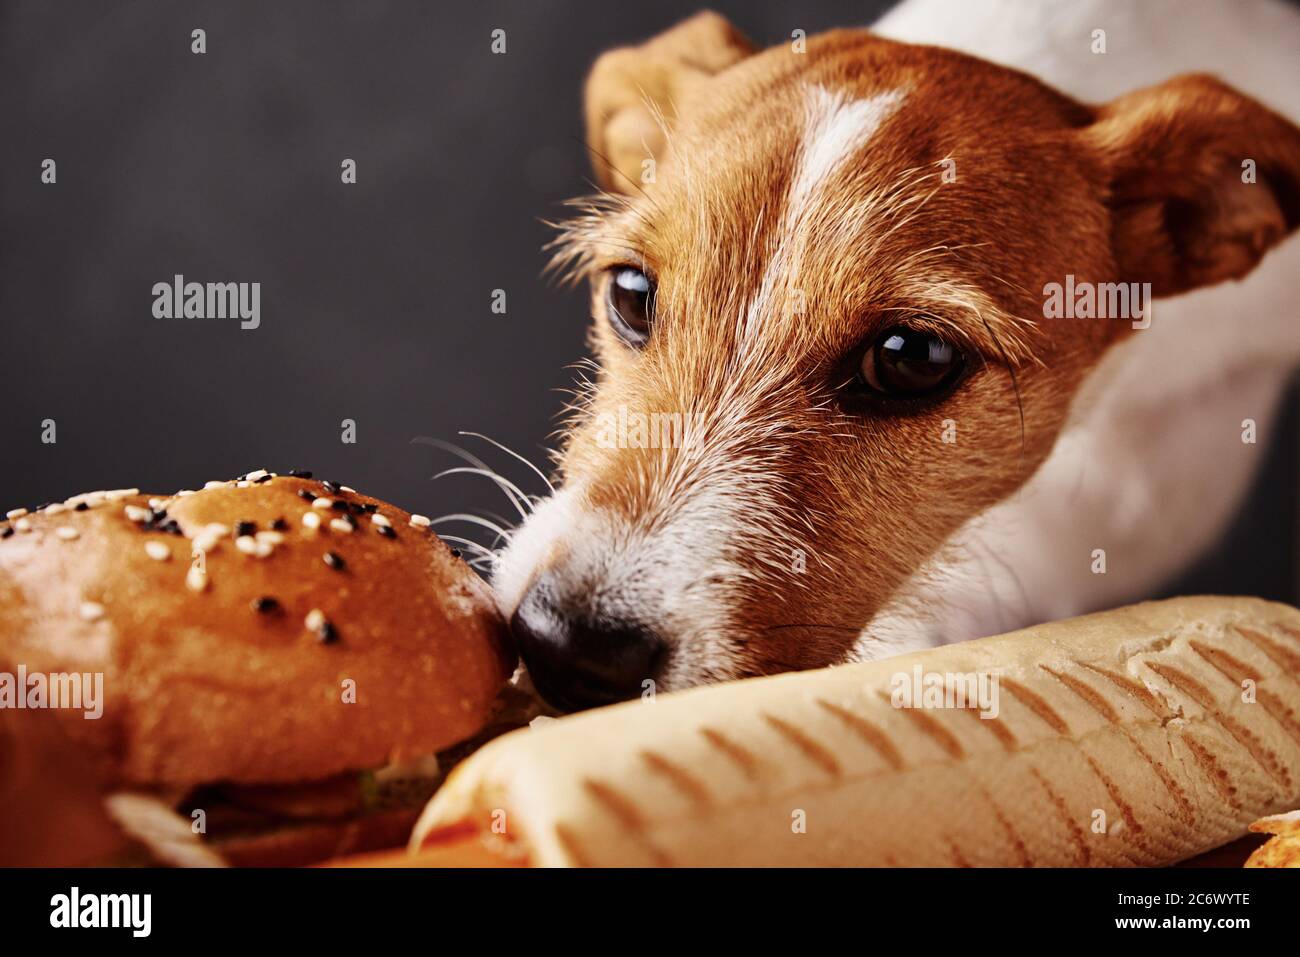 Hungry dog stealing food from table. Jack russell terrier puppy eating  unhealthy fast food. Pet nutrition Stock Photo - Alamy